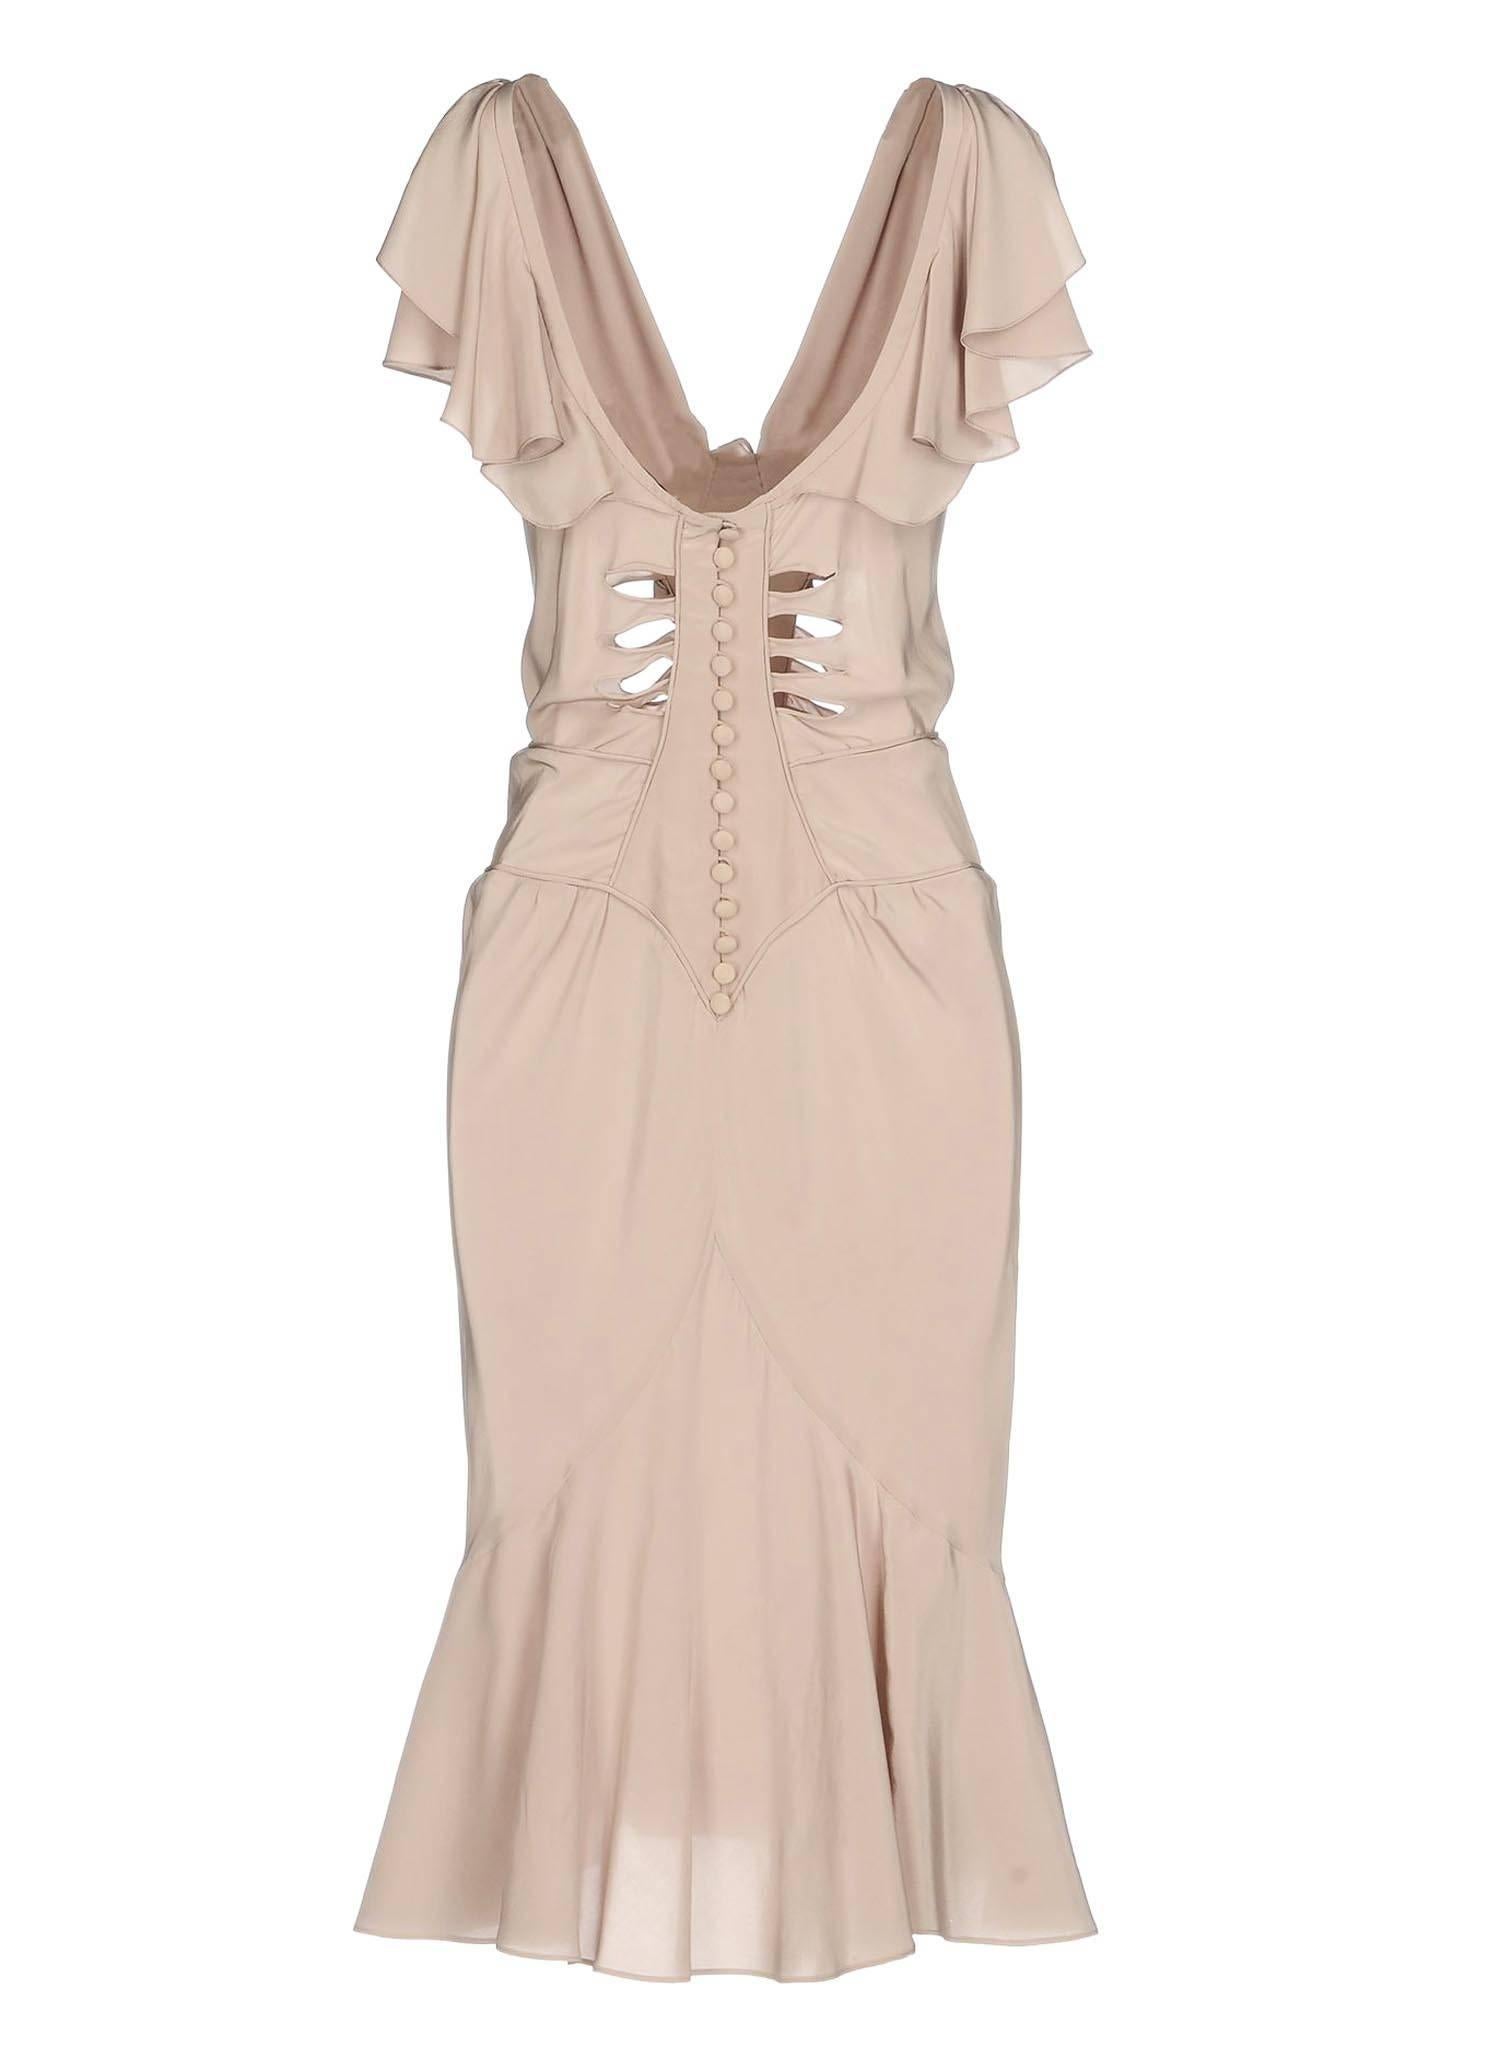 New Tom Ford for Yves Saint Laurent Rive Gauche Silk Dress
S/S 2003 Collection
French size 36 - US 4
100% Silk, Nude color with lavender shade, Cut out details, Button close at back.
Made in France
New with tag.